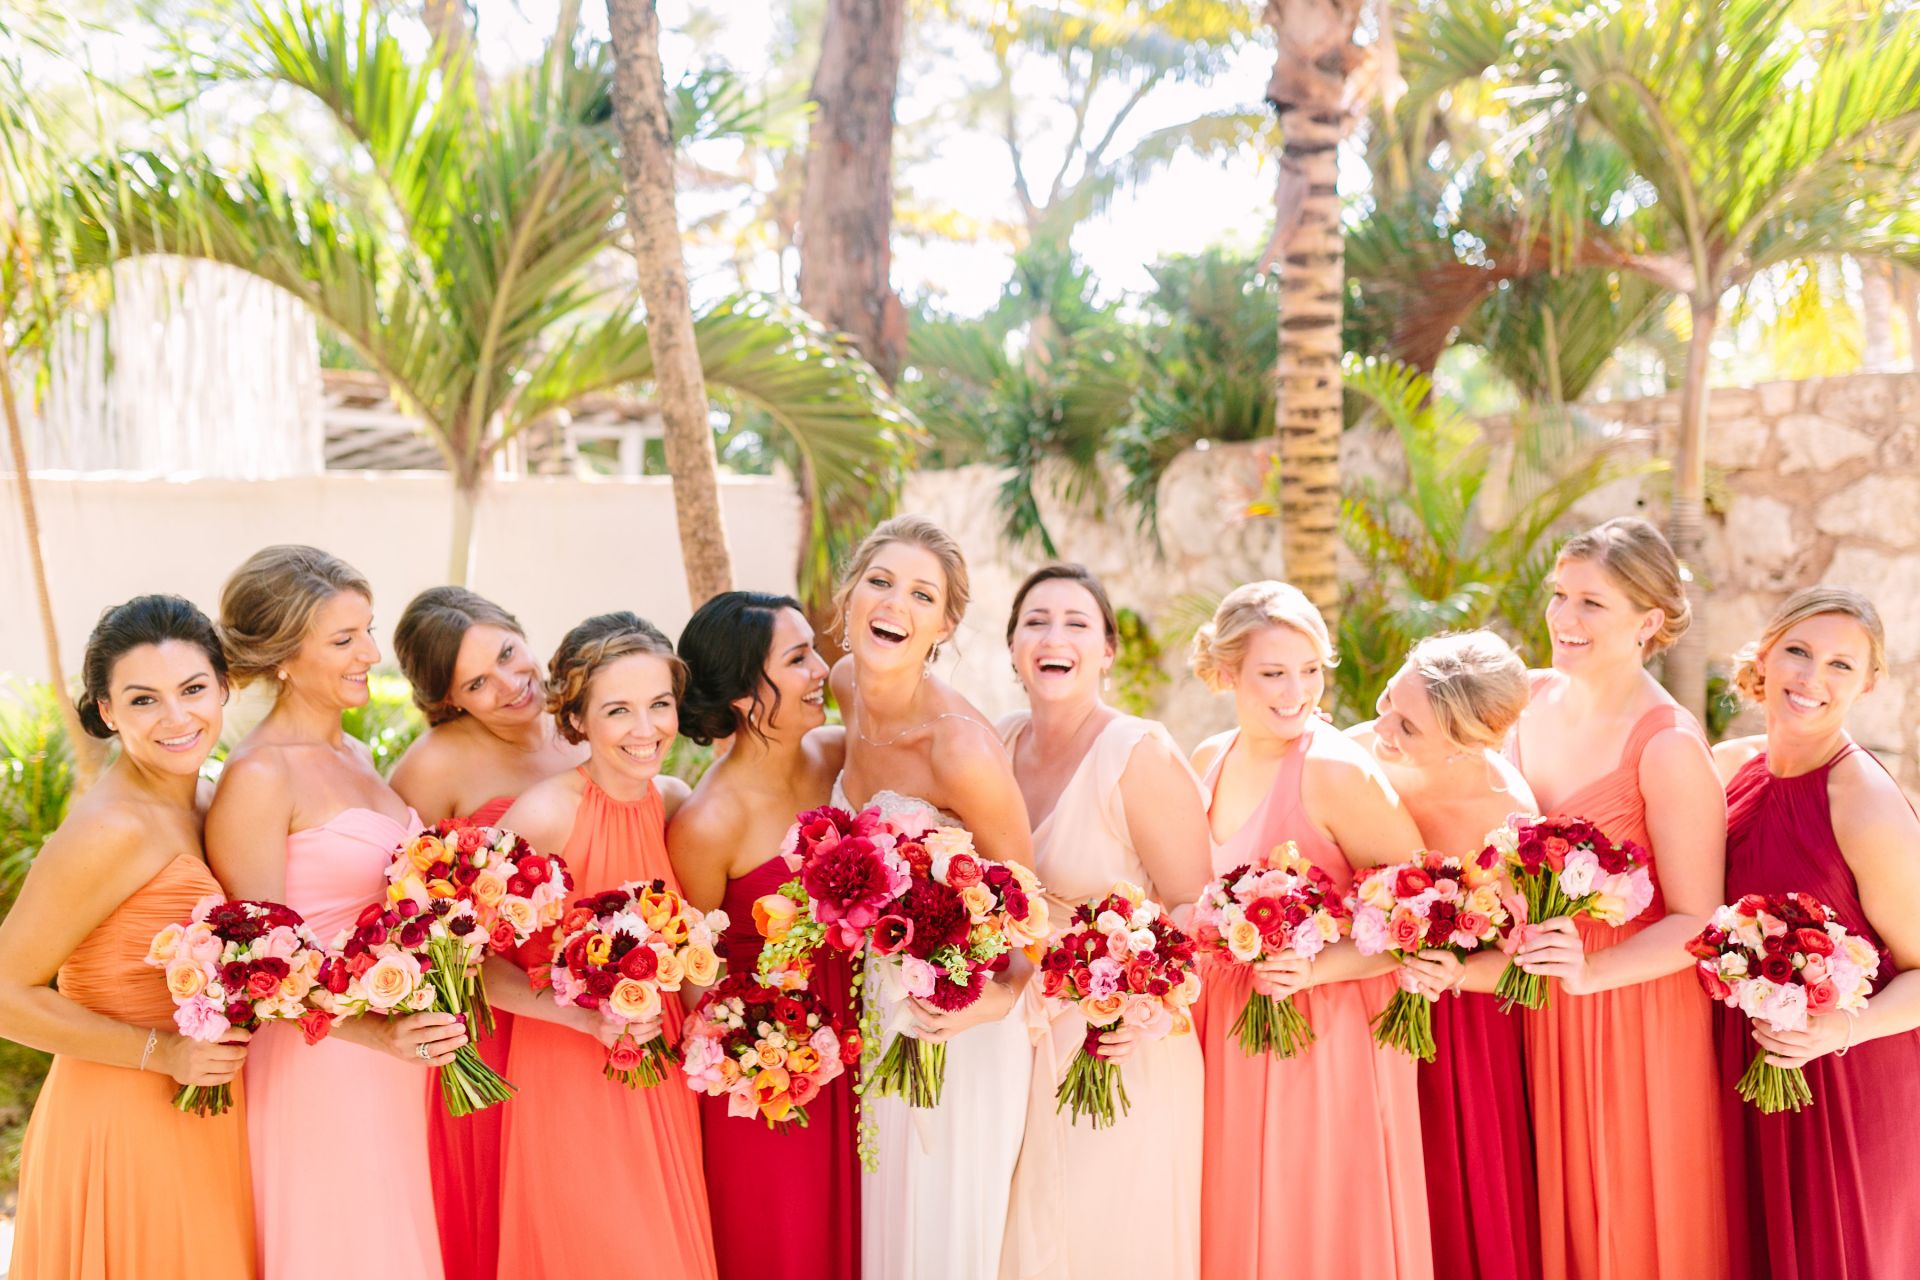 Living Coral bridesmaid dresses inspiration. // Get inspired with this gallery filled with 50+ awesome wedding ideas for your bridesmaids, including dresses, proposals & more. // mysweetengagement.com